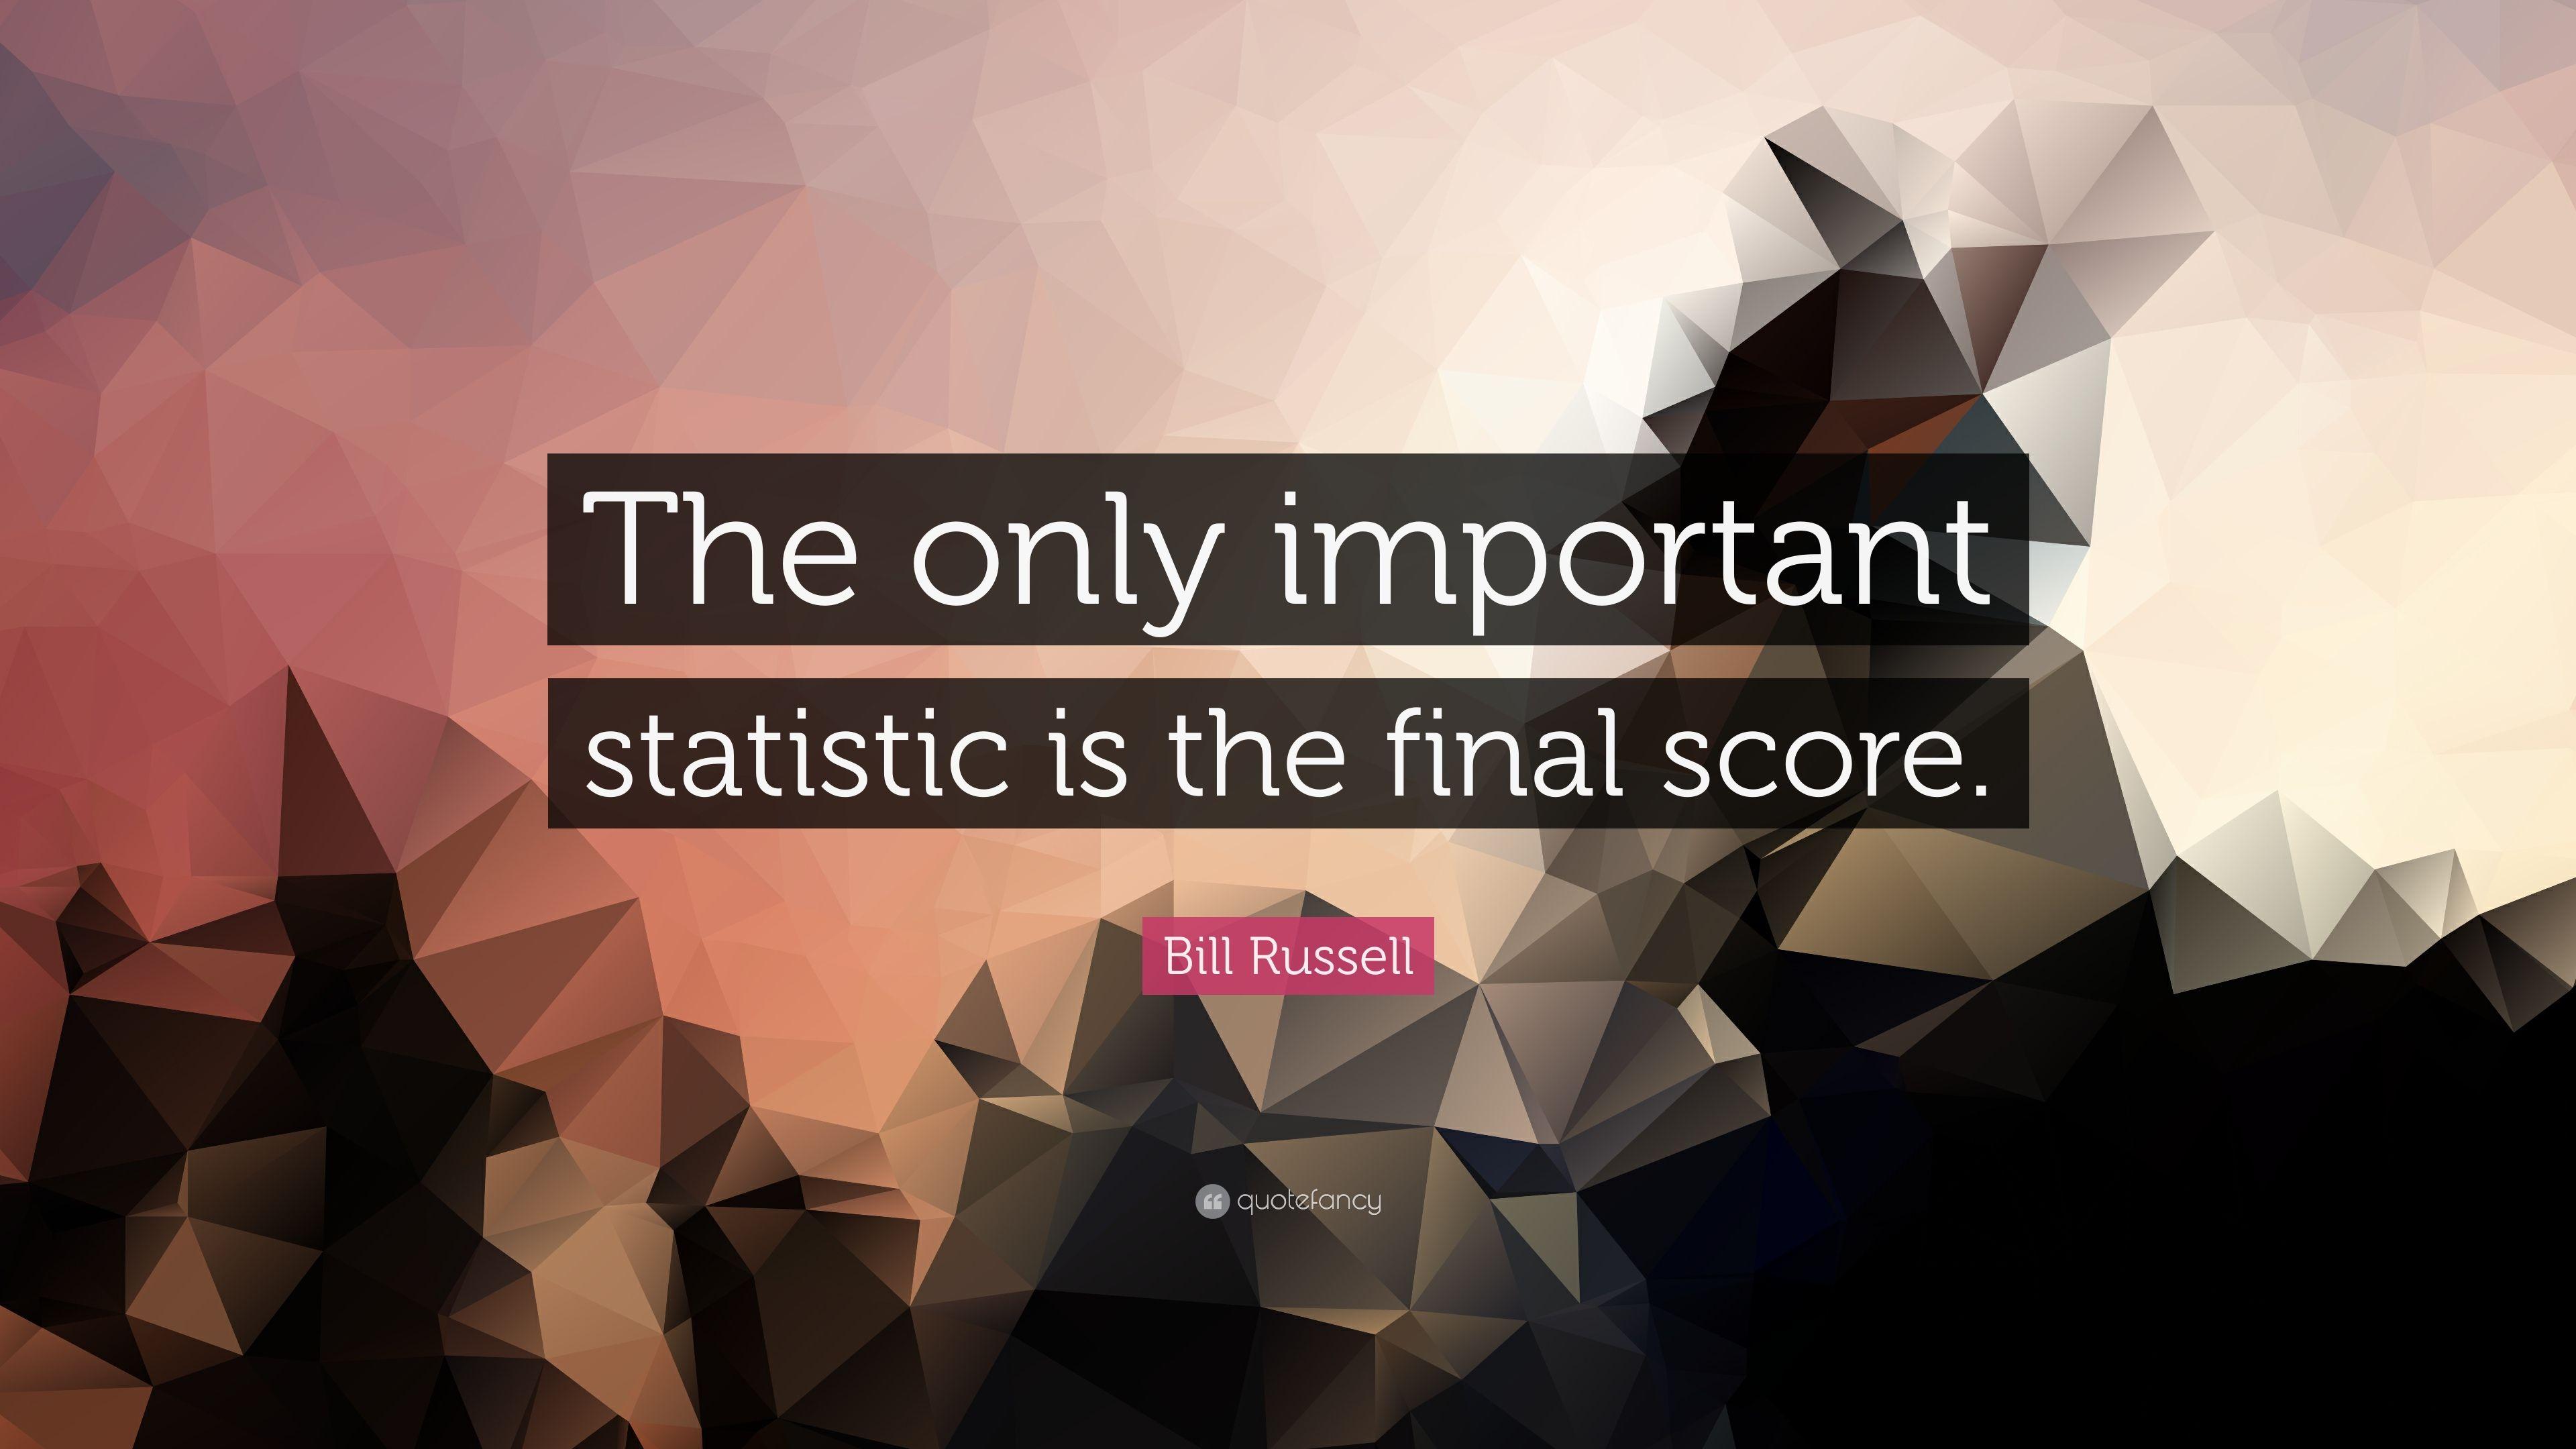 Bill Russell Quote: “The only important statistic is the final